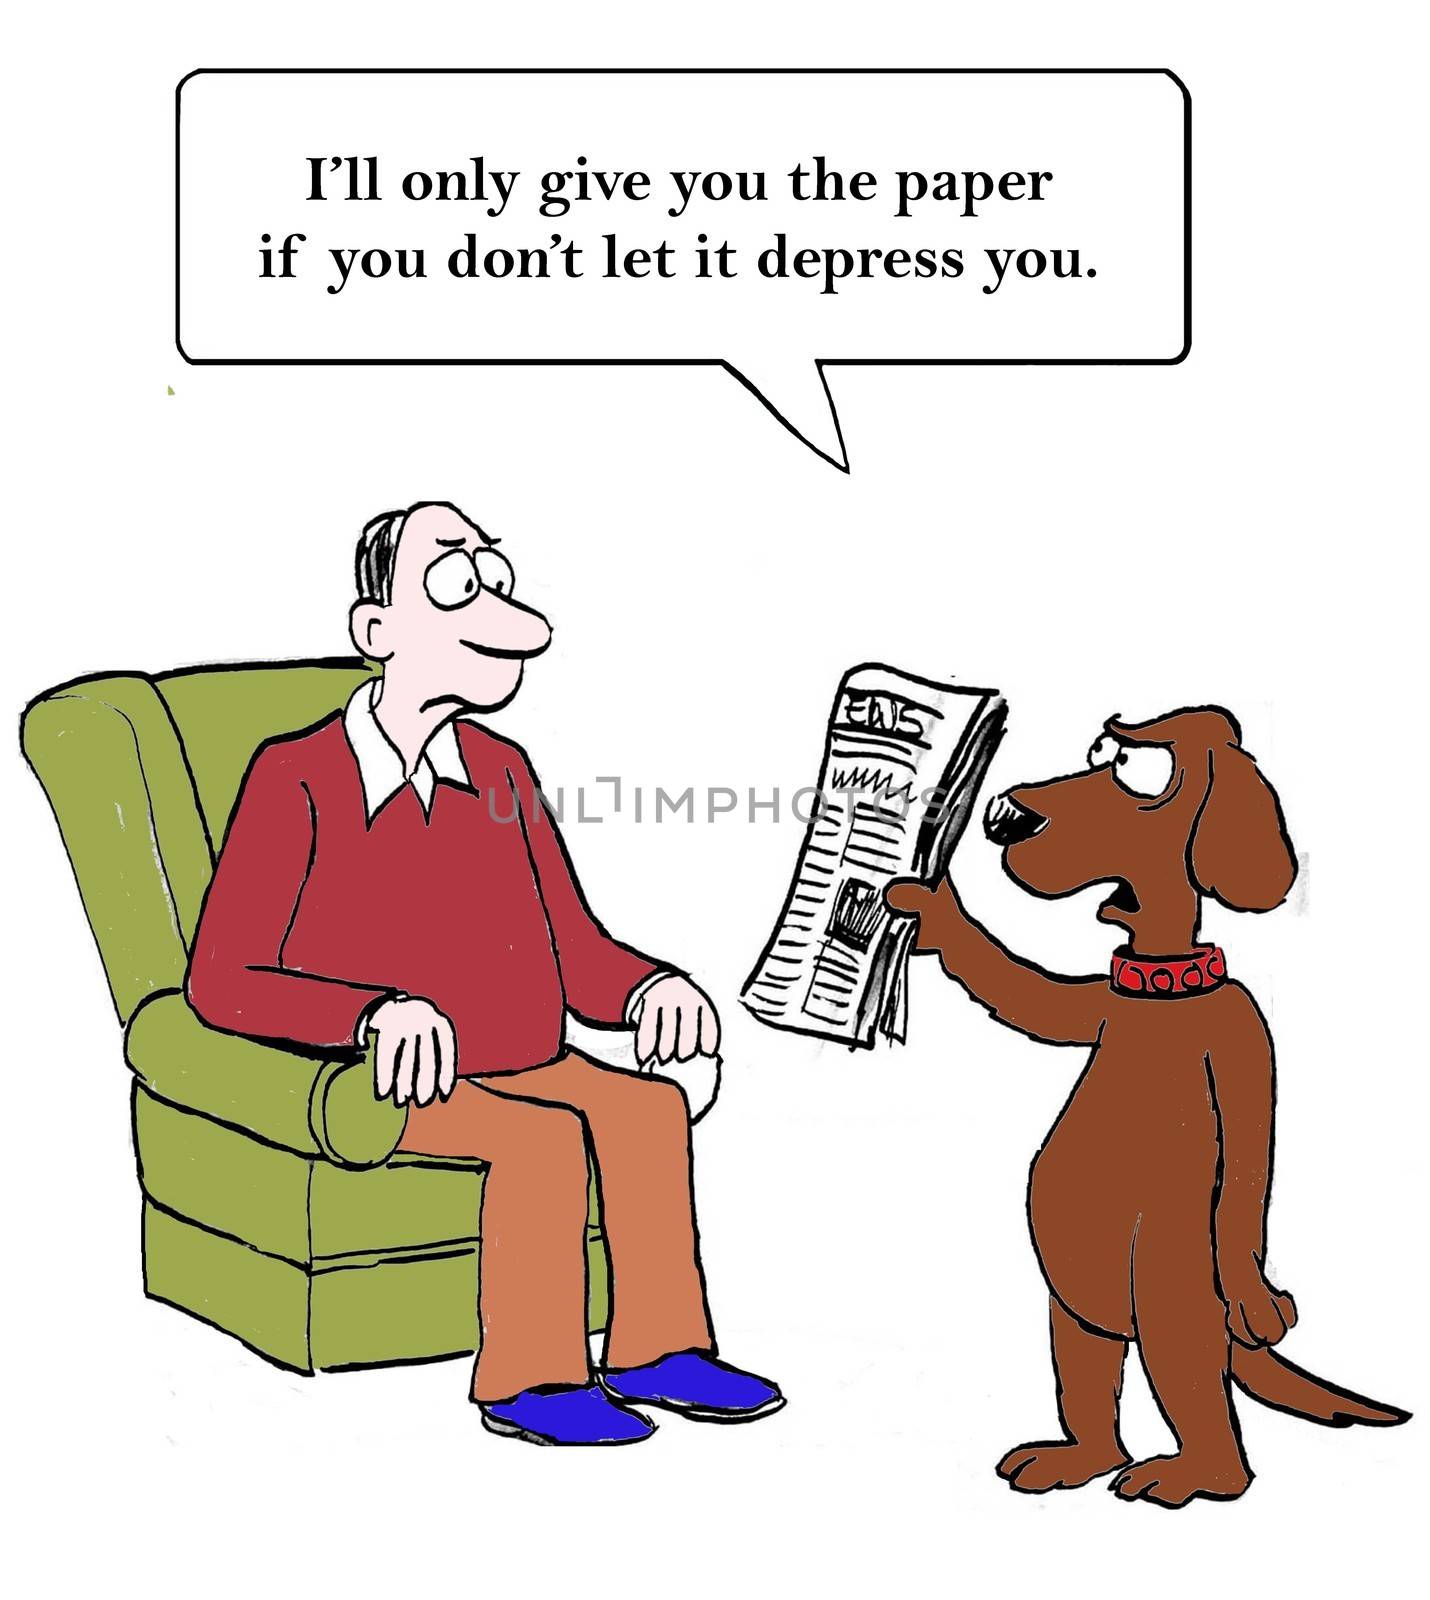 "I'll only give you the paper if you don't let it depress you."